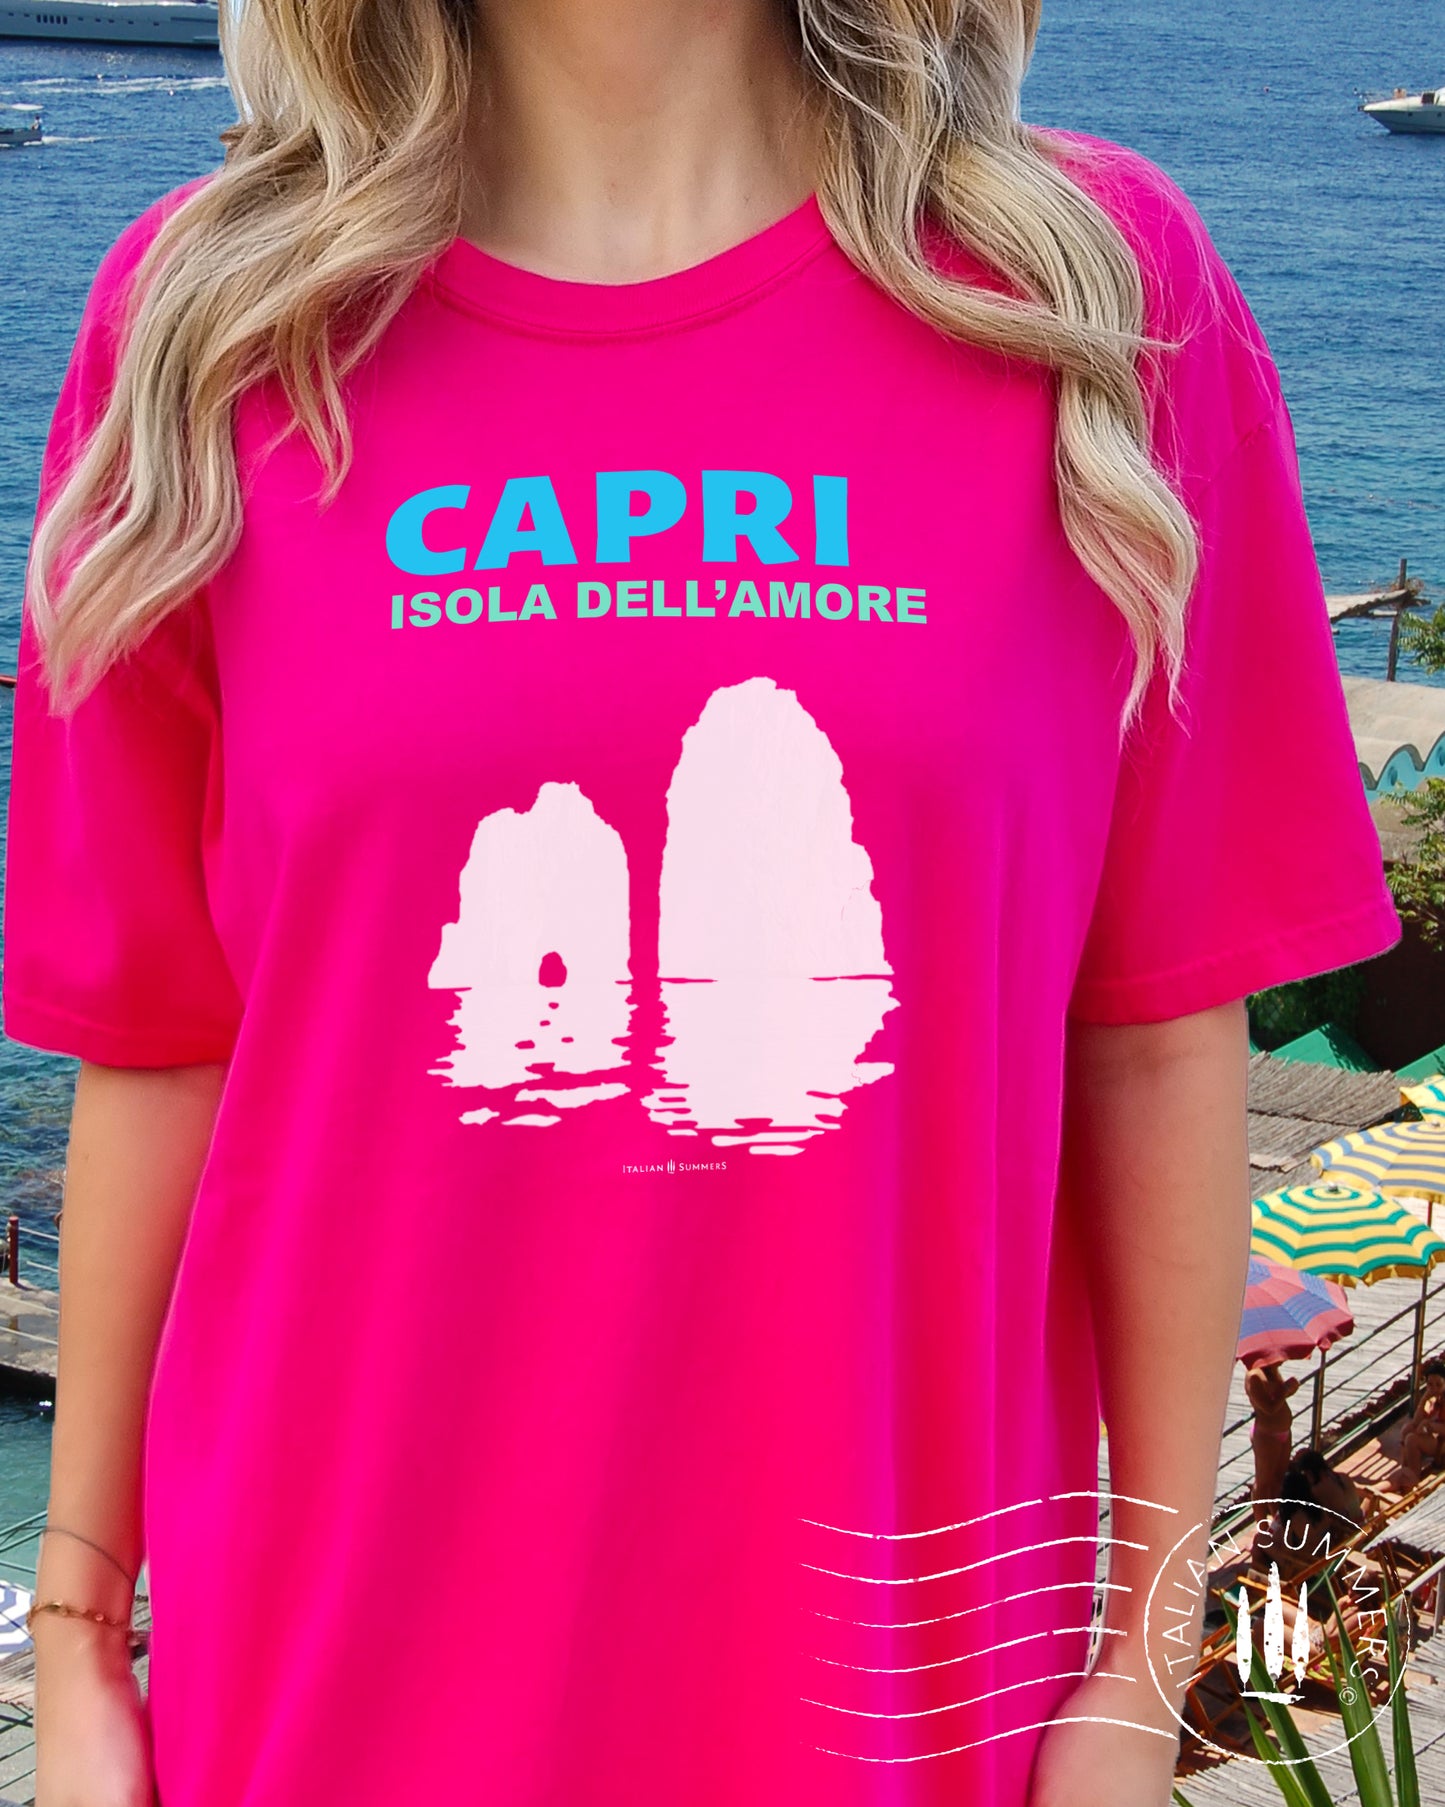 Italy inspired garment dyed T shirt with the aqua and white text: CAPRI, Isola dell'Amore (Capri, Iland of Love) with the silhouette of the famous Faraglioni and their reflection umpon the waters of the Mediterranean Sea. Made by Italian Summers